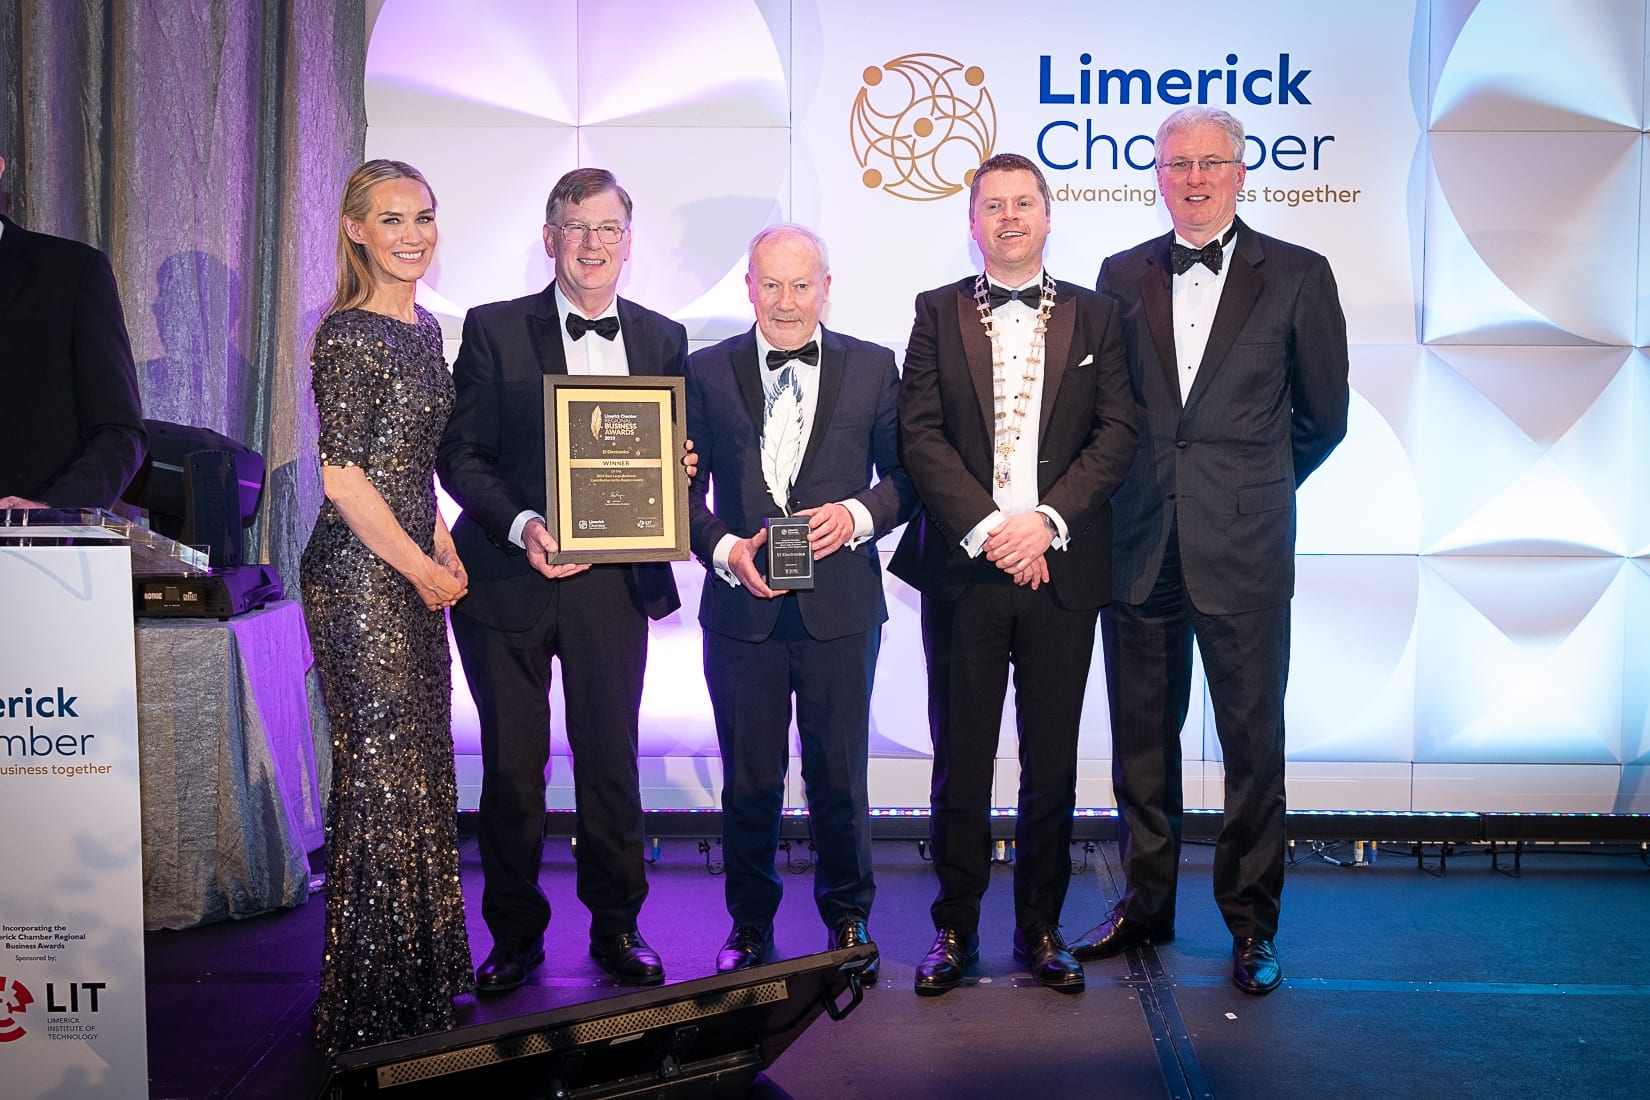 No repro fee-Limerick Chamber President’s Dinner
and Limerick Chamber Regional Business Awards 2019 which was held in the Strand Hotel on Friday 15th November /Best Large Business/  - From Left to Right: Dee Ryan - CEO Limerick Chamber, Jim Duignan - Winner / EL Electronics, Mick Guinee - Winner / EL Electronics, Eoin Ryan - President Limerick Chamber, Donal Creaton - HOMS / Sponsor. 
Photo credit Shauna Kennedy